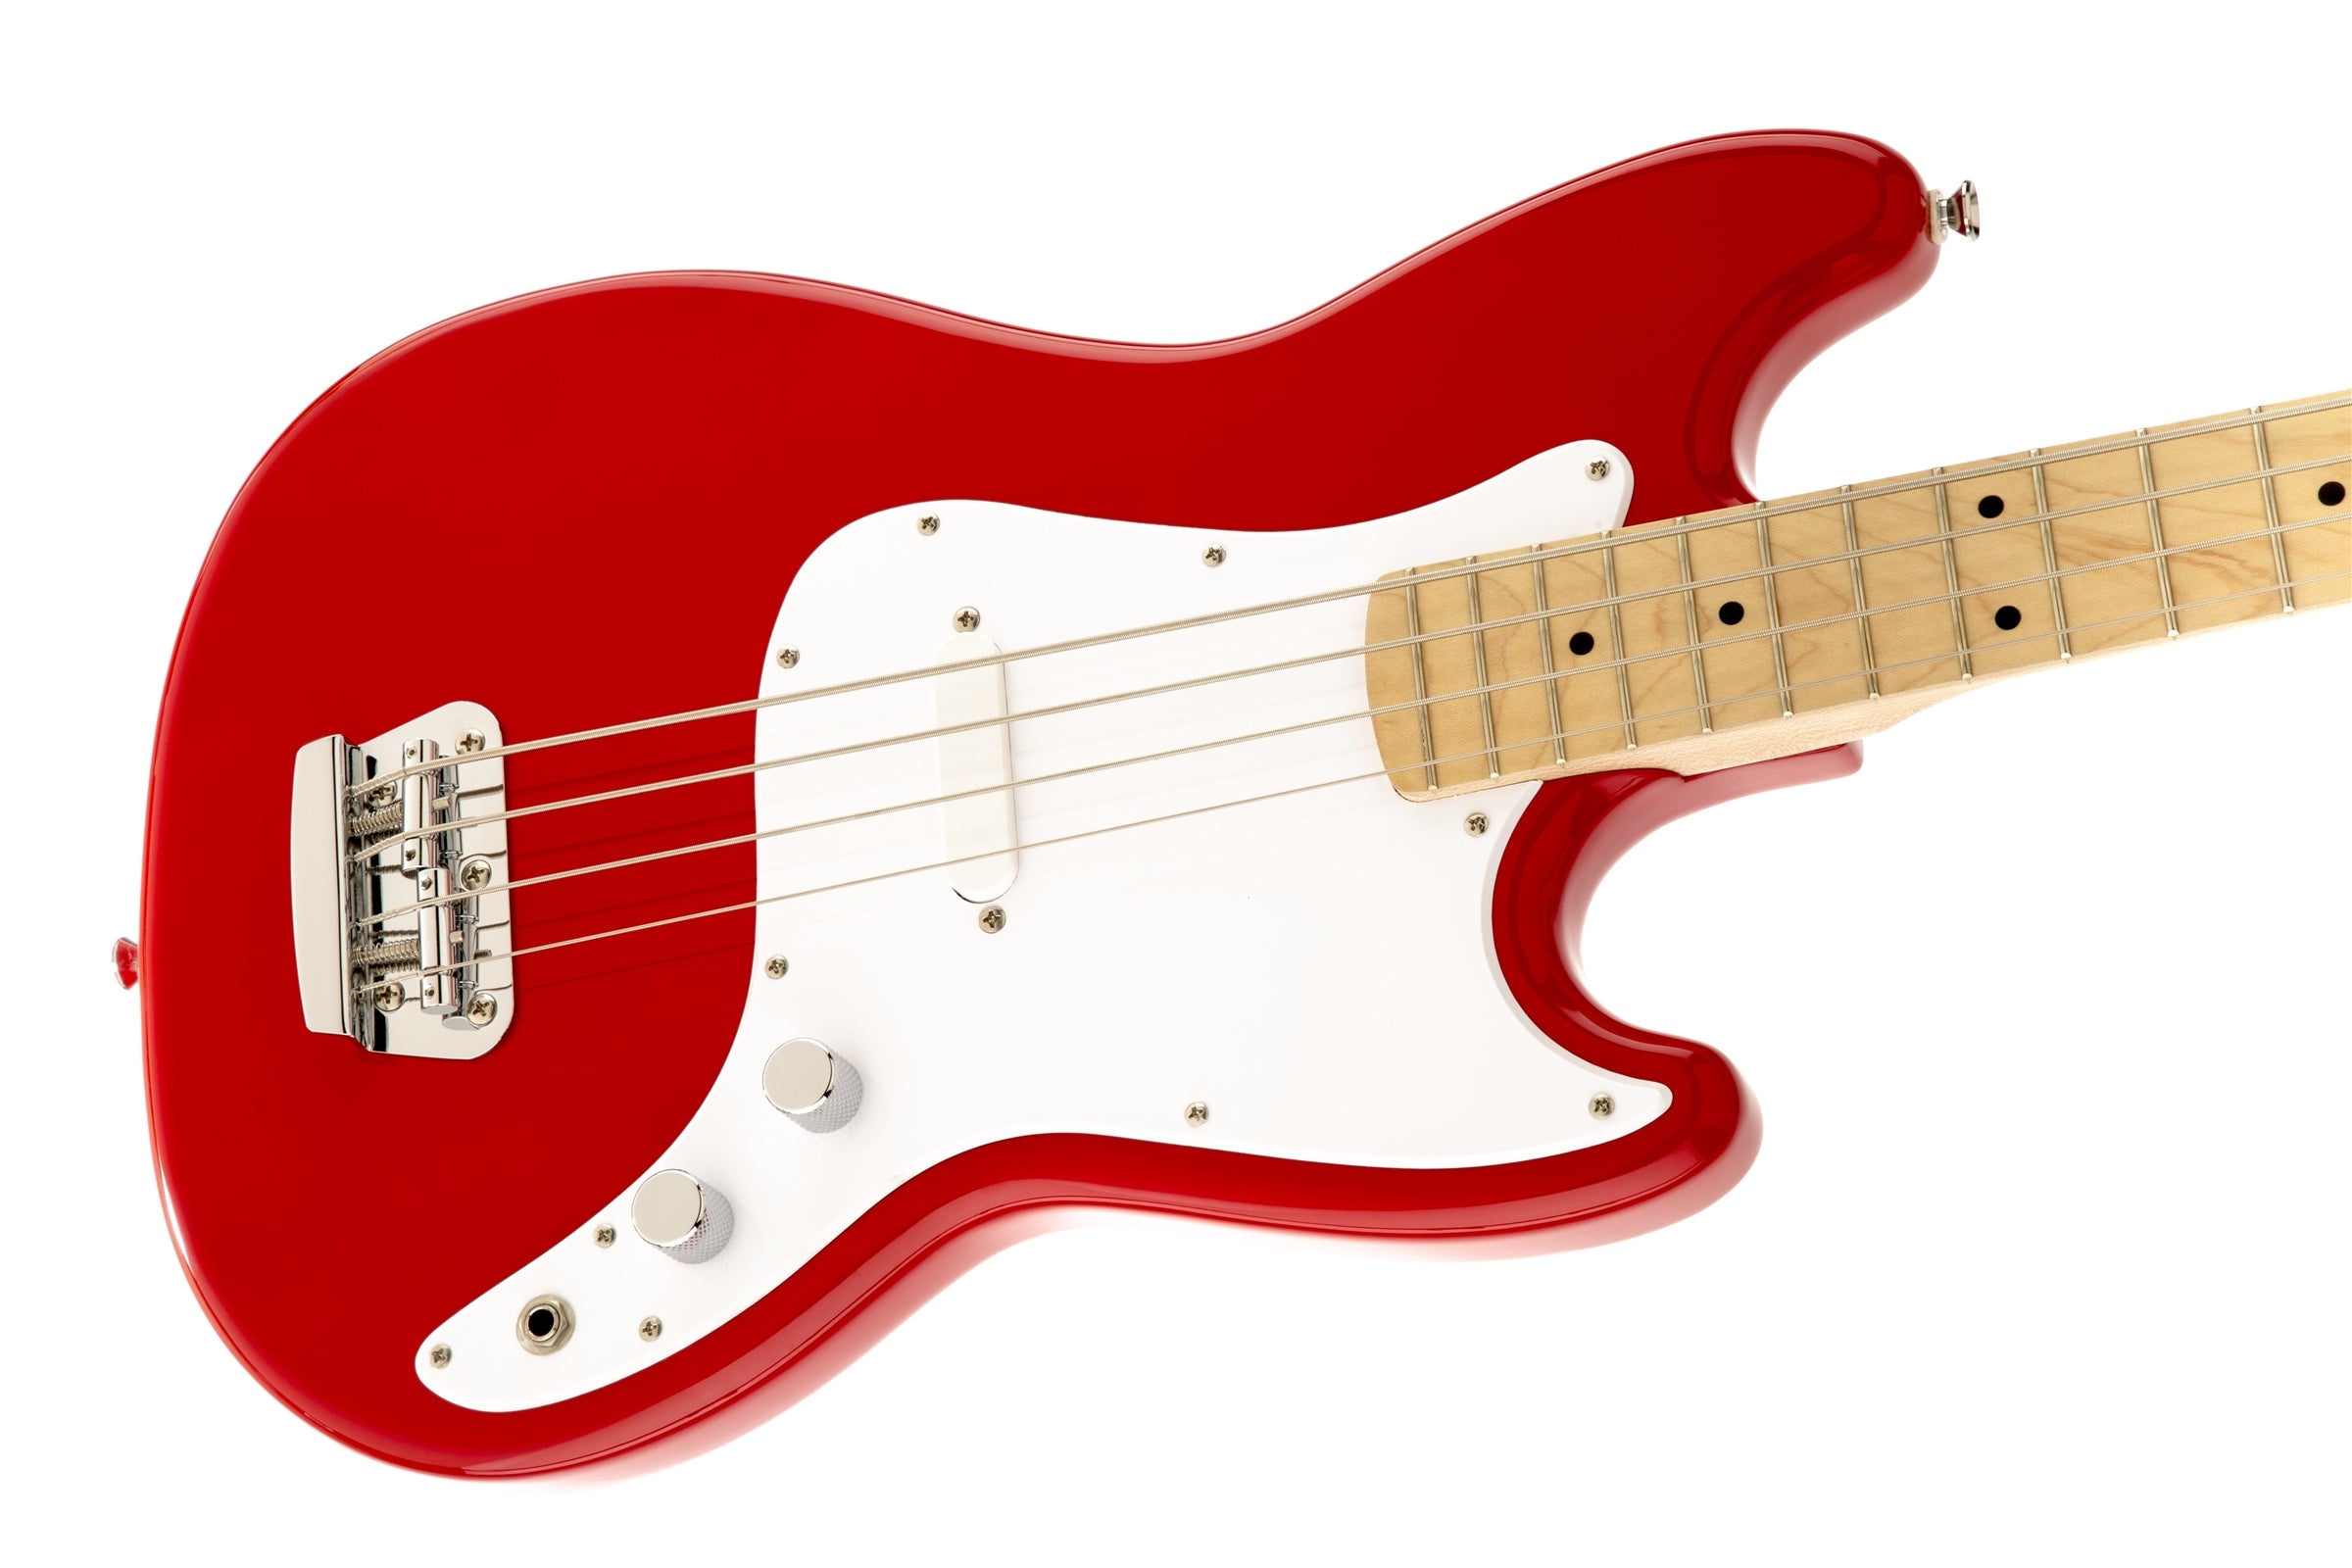 Squier Bronco 4 String Electric Bass - Torino Red